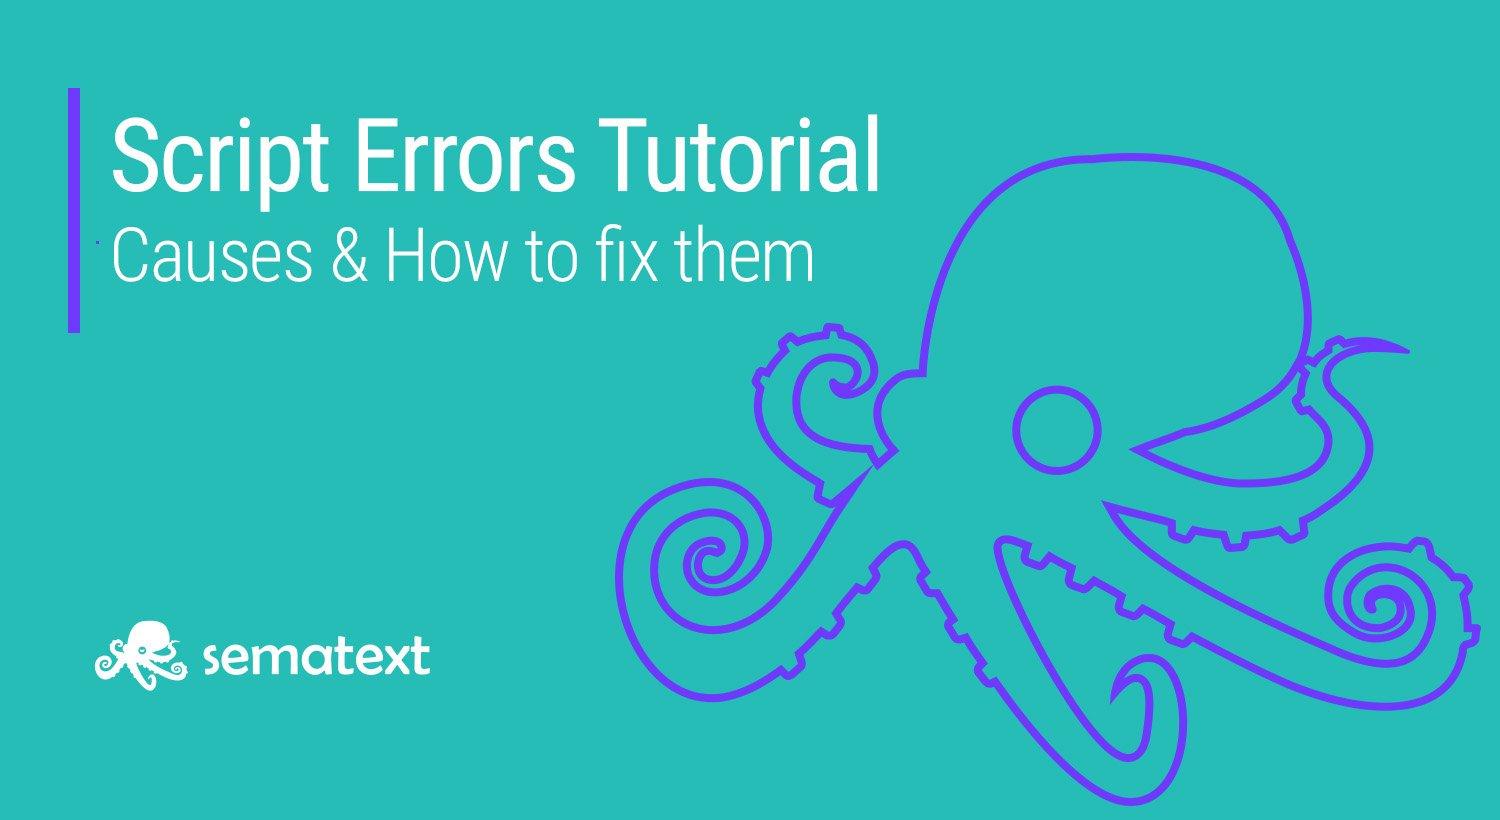 What Are Script Errors and How to Fix Them